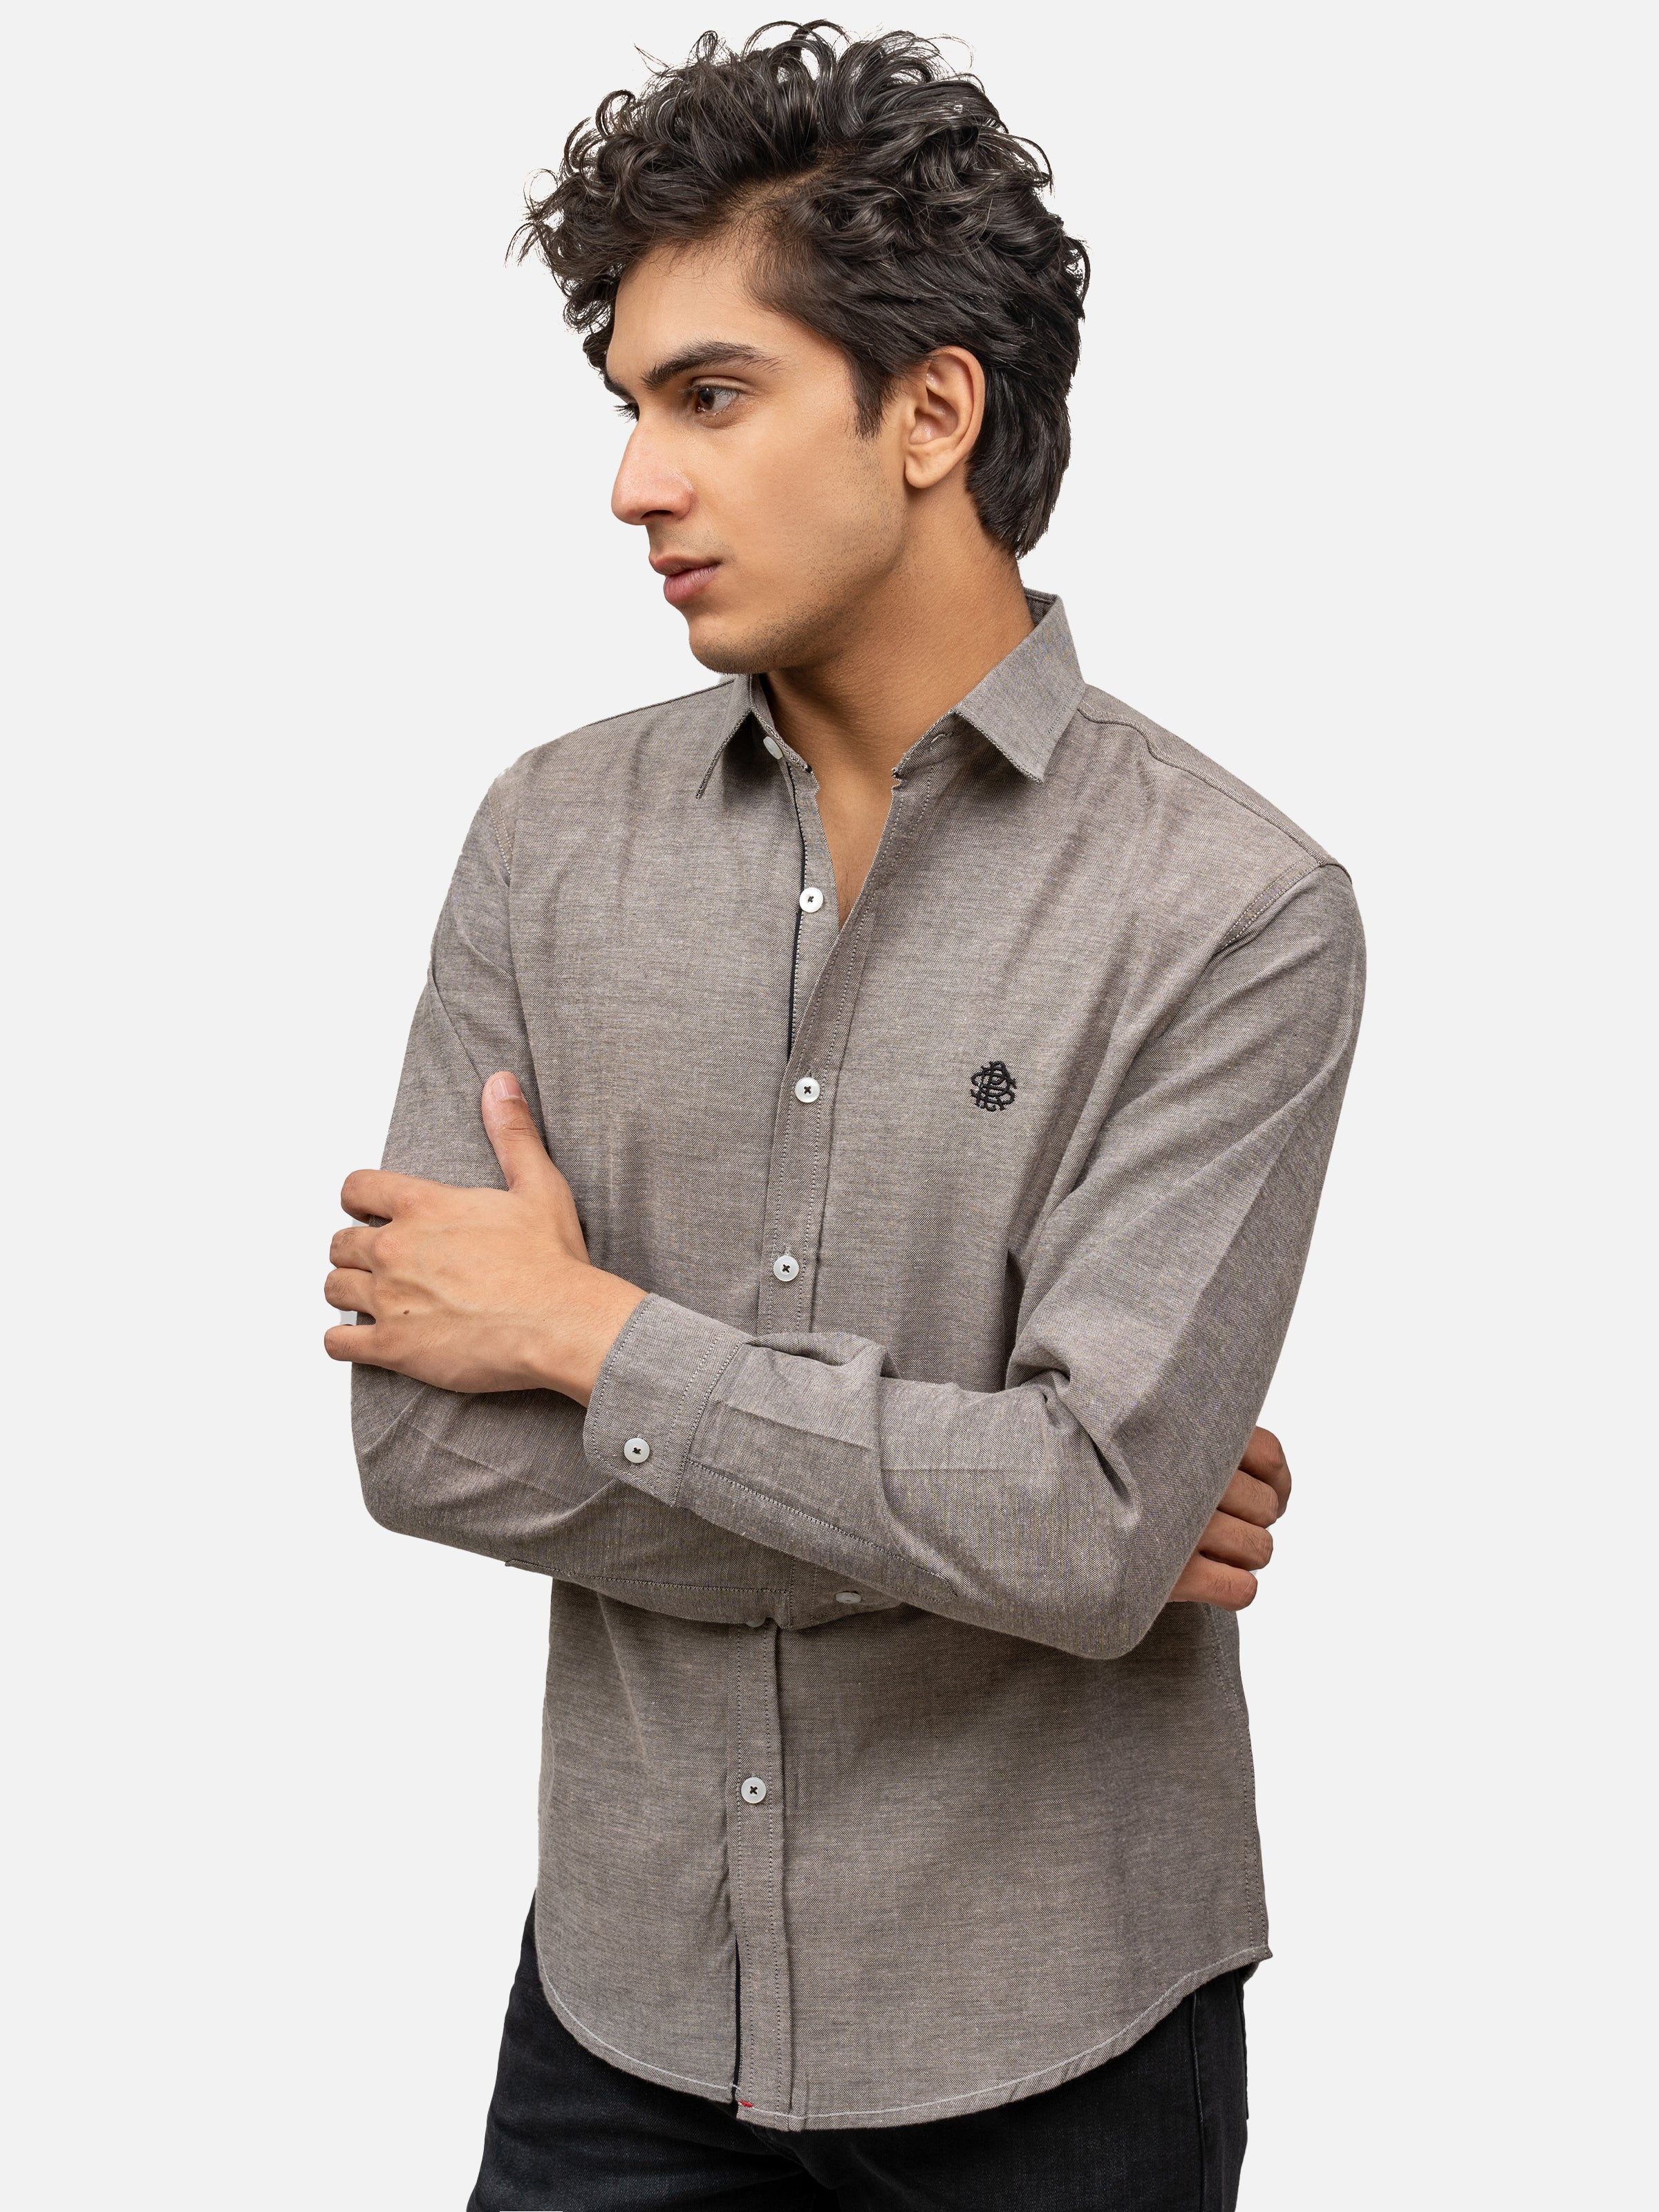 CASUAL SHIRT FULL SLEEVES SMART FIT GREY